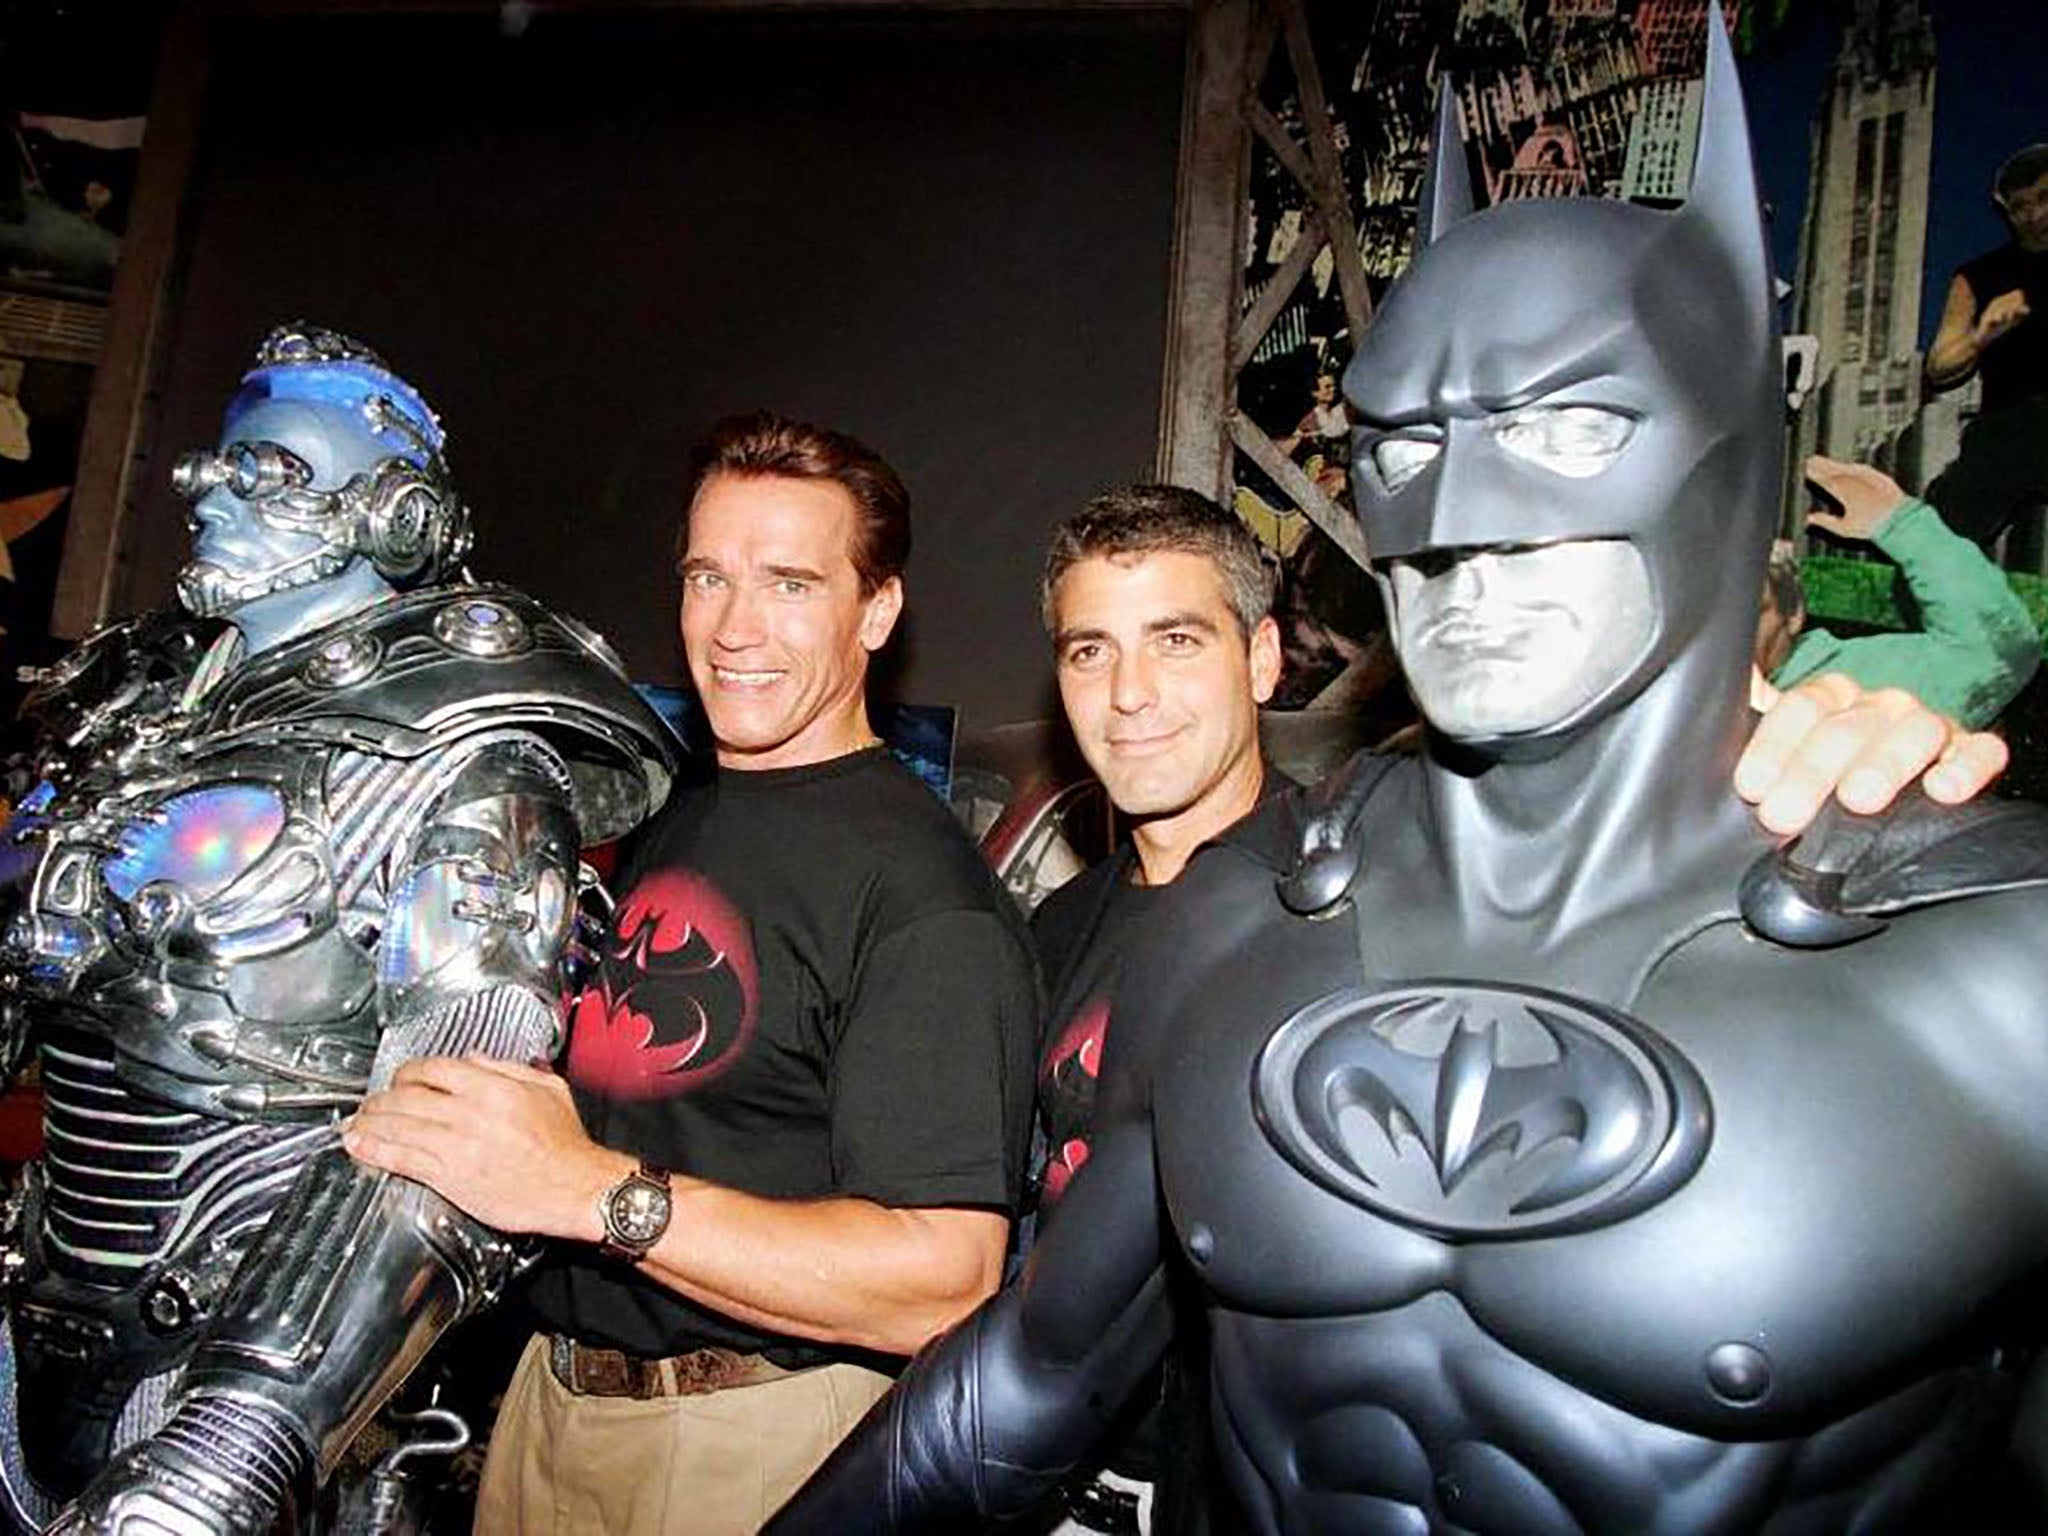 Arnold Schwarzenegger and George Clooney attend a ‘Batman & Robin’ press event at Planet Hollywood in 1997